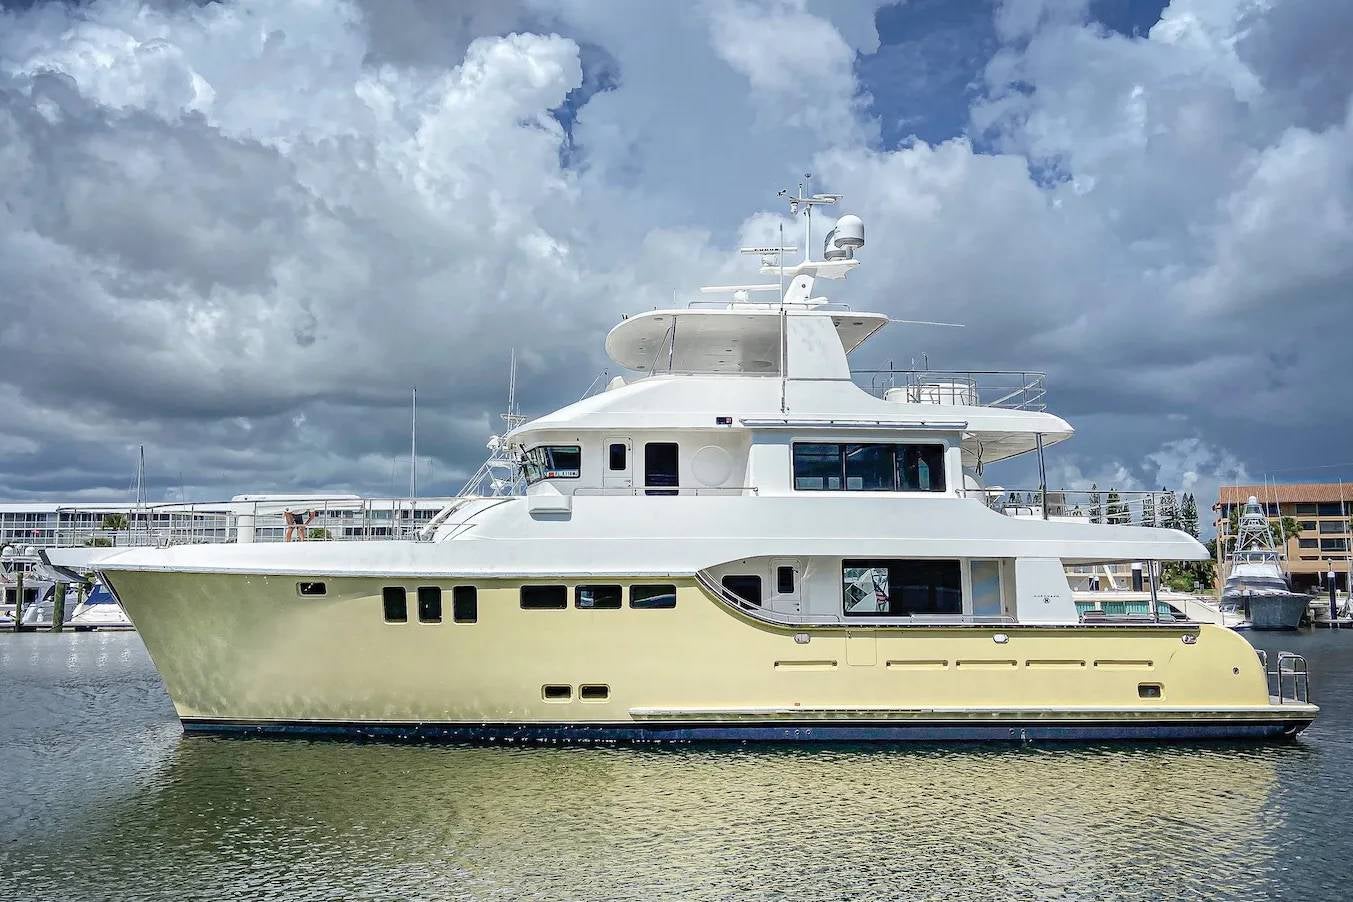 A doctor was arrested after police found guns, drugs and prostitutes aboard a 70ft motor yacht anchored at a small island of Massachusetts.